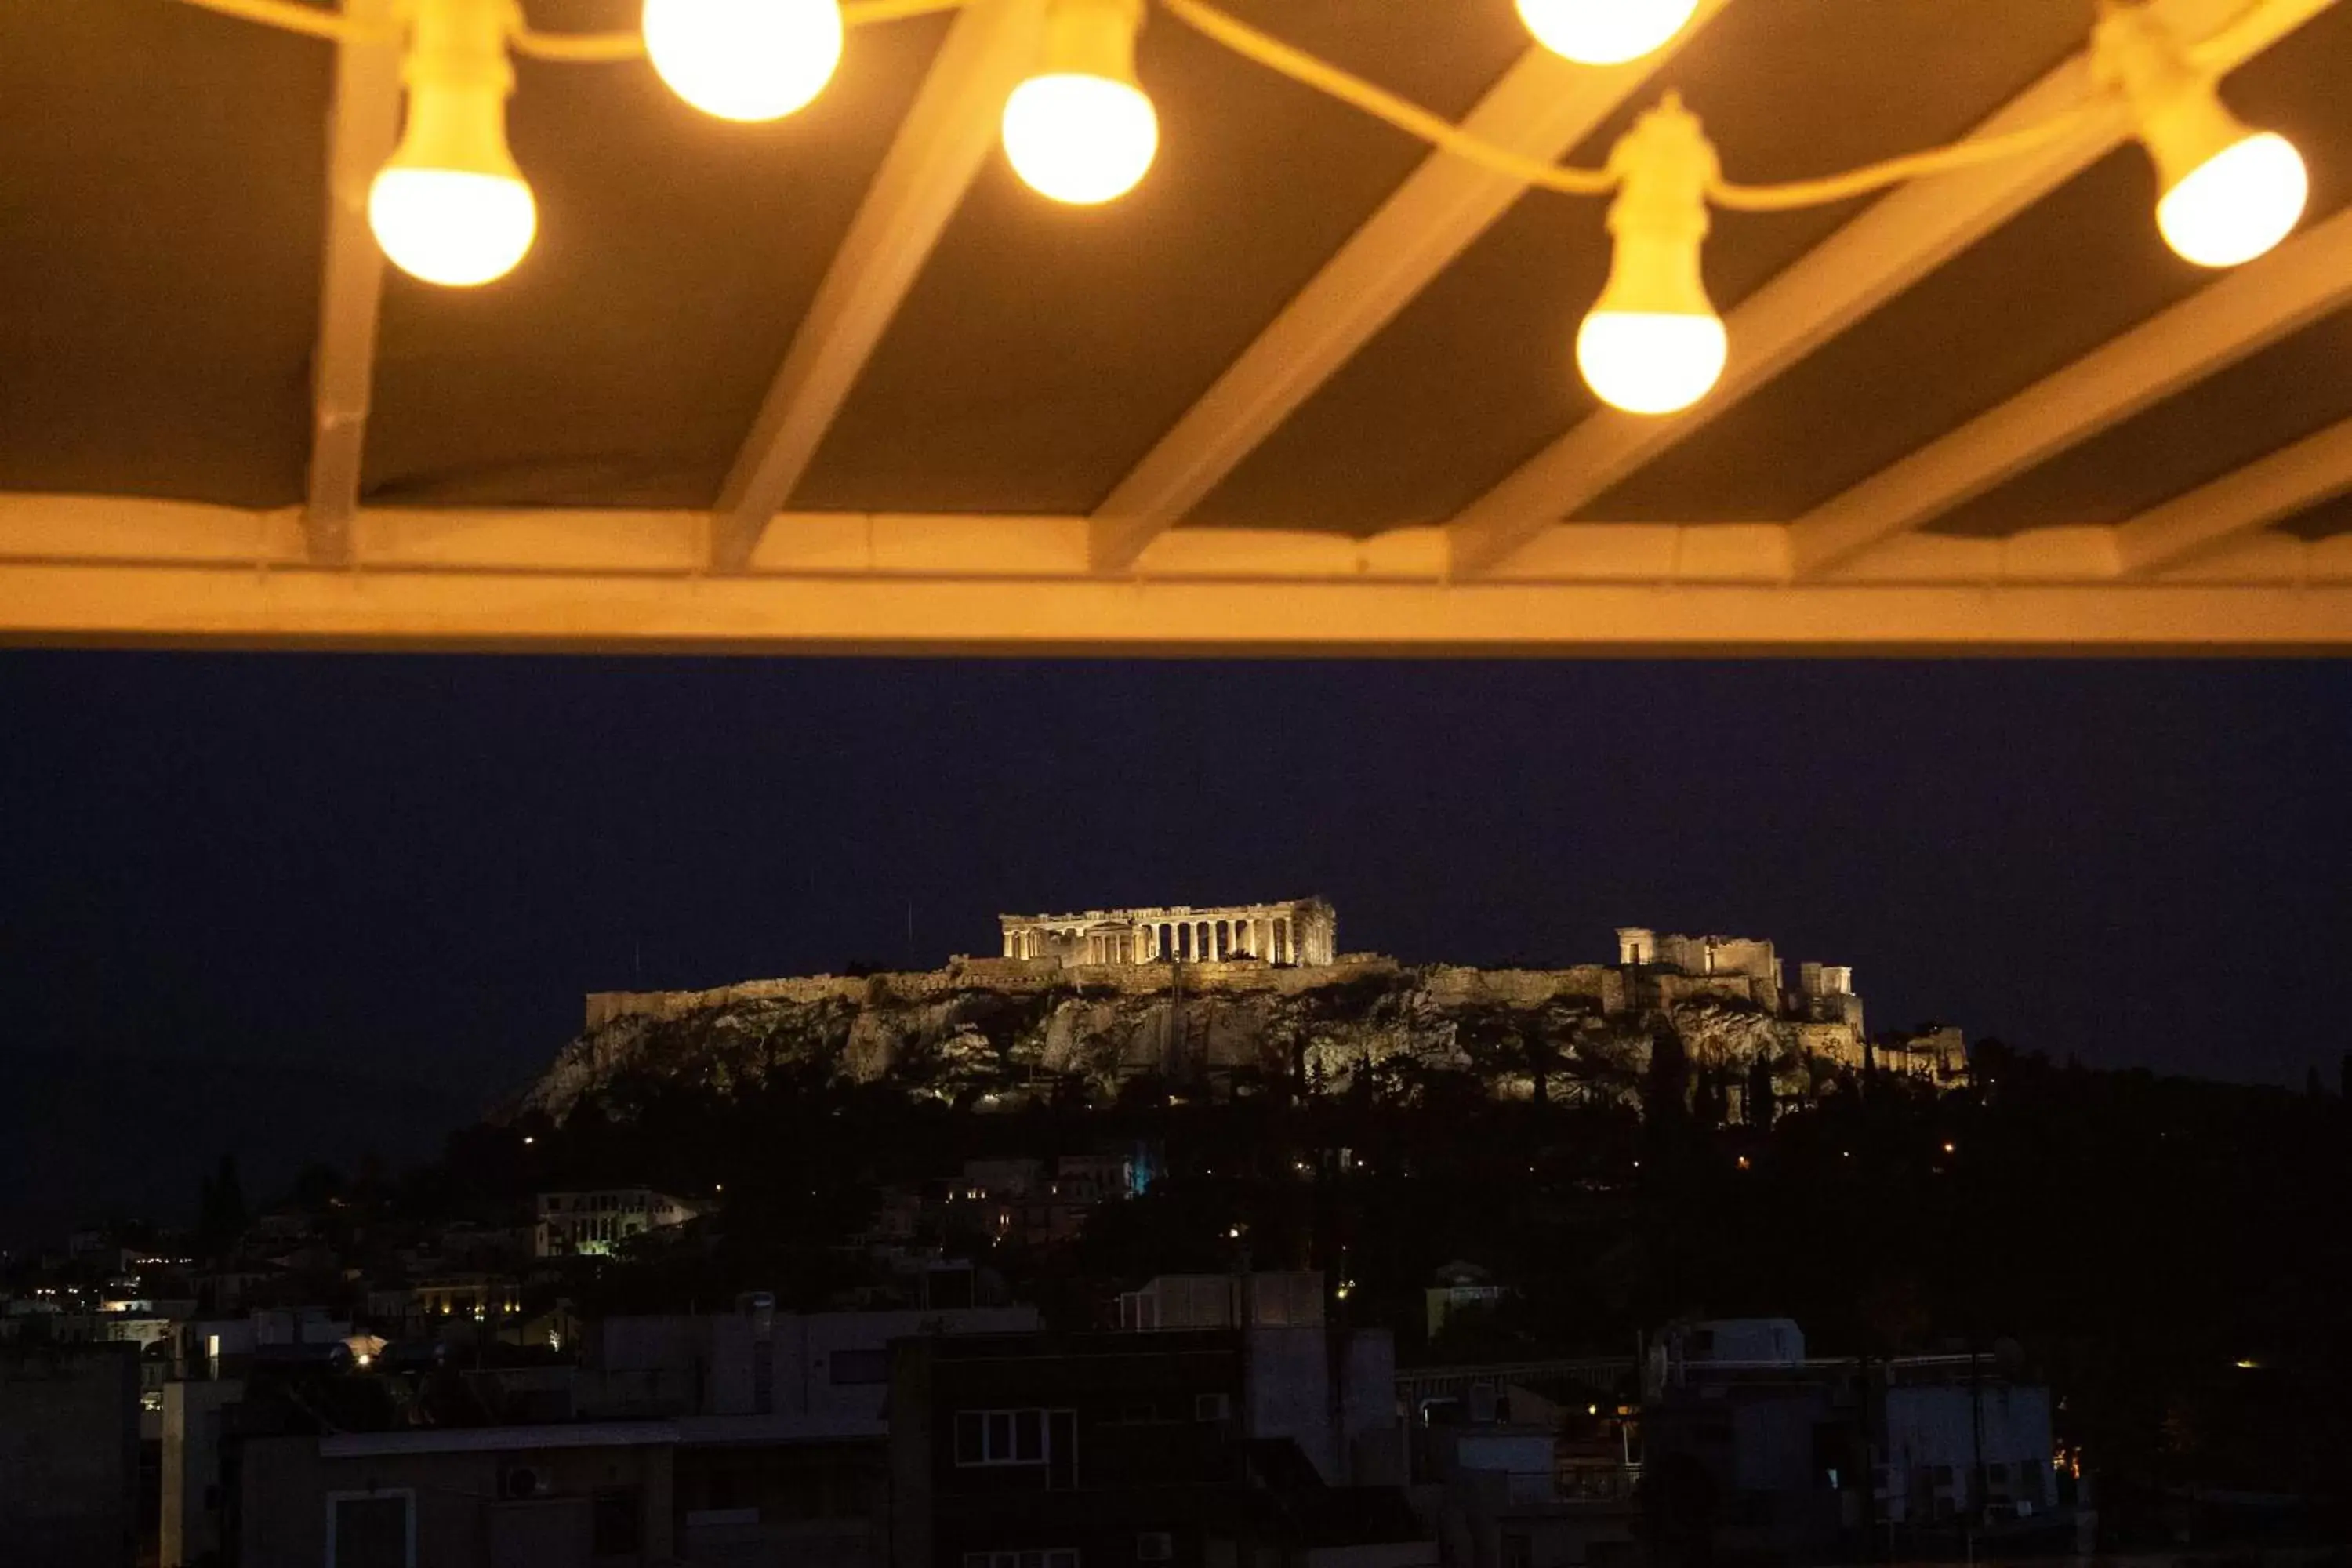 Neighbourhood in Downtown Athens Lofts - The Acropolis Observatory